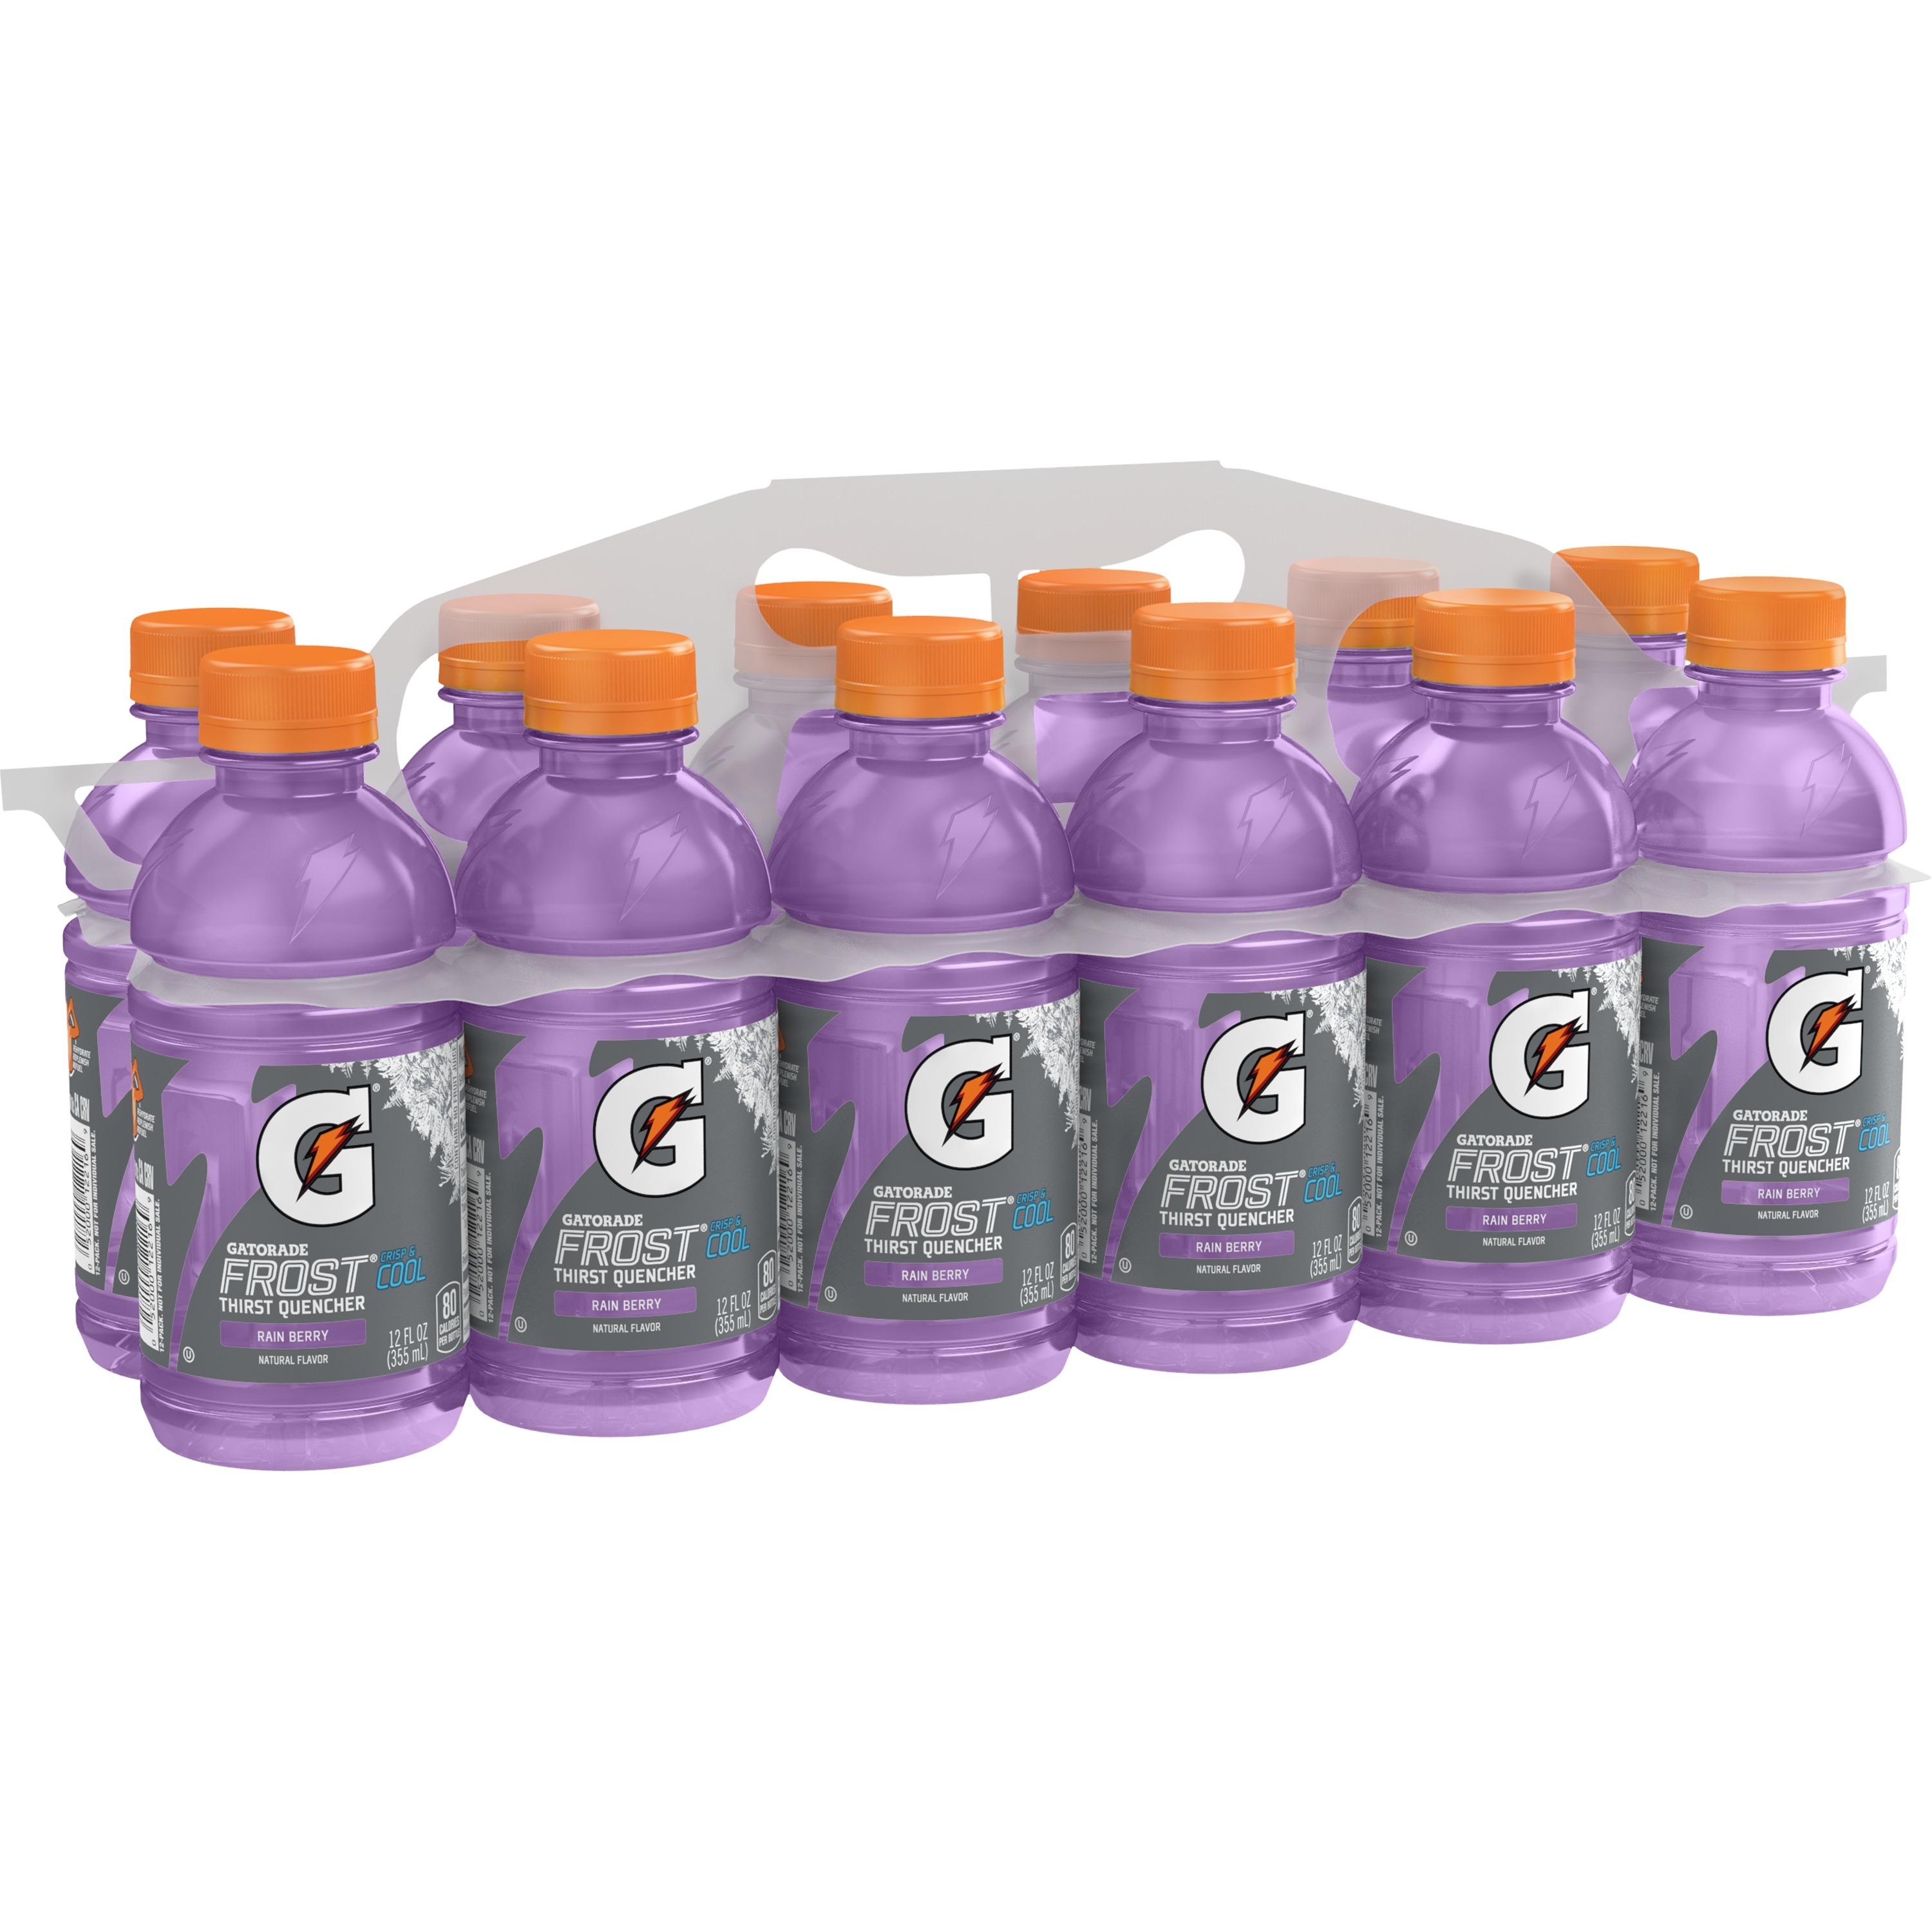 Gatorade Frost Thirst Quencher Rain Berry Sports Drink, 12 fl oz, 12 Count Bottles - image 2 of 8